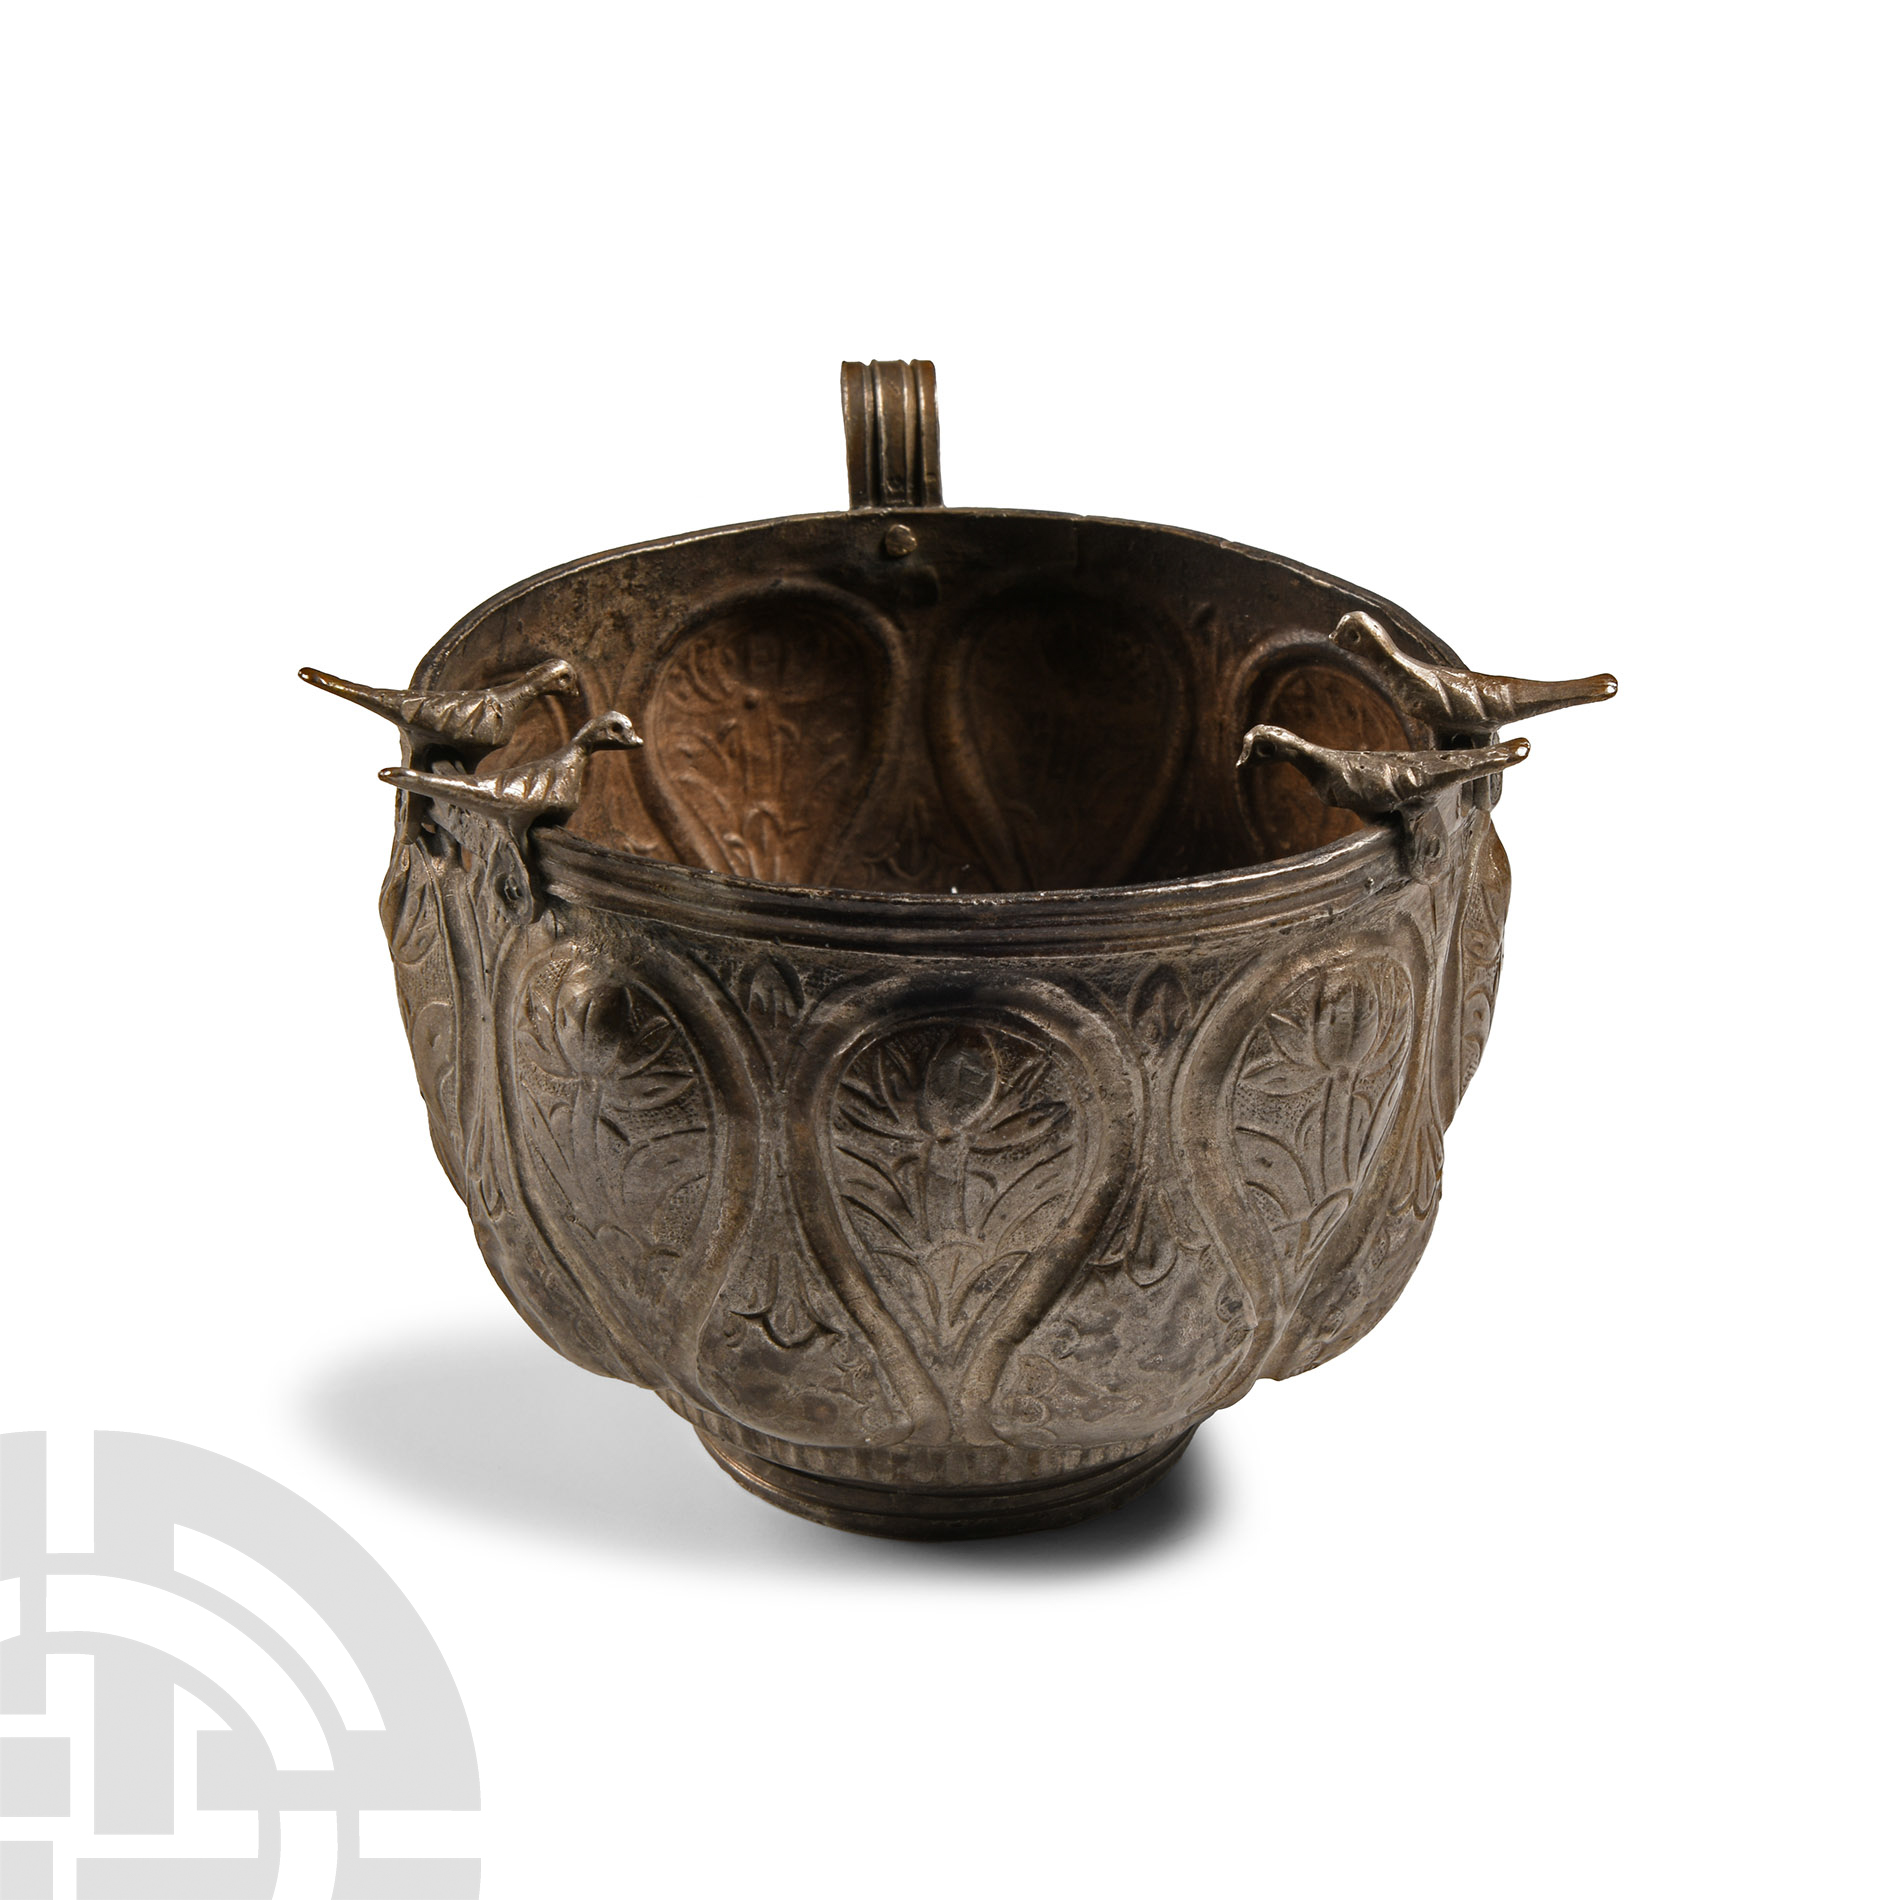 Medieval Period Silver Cup with Birds